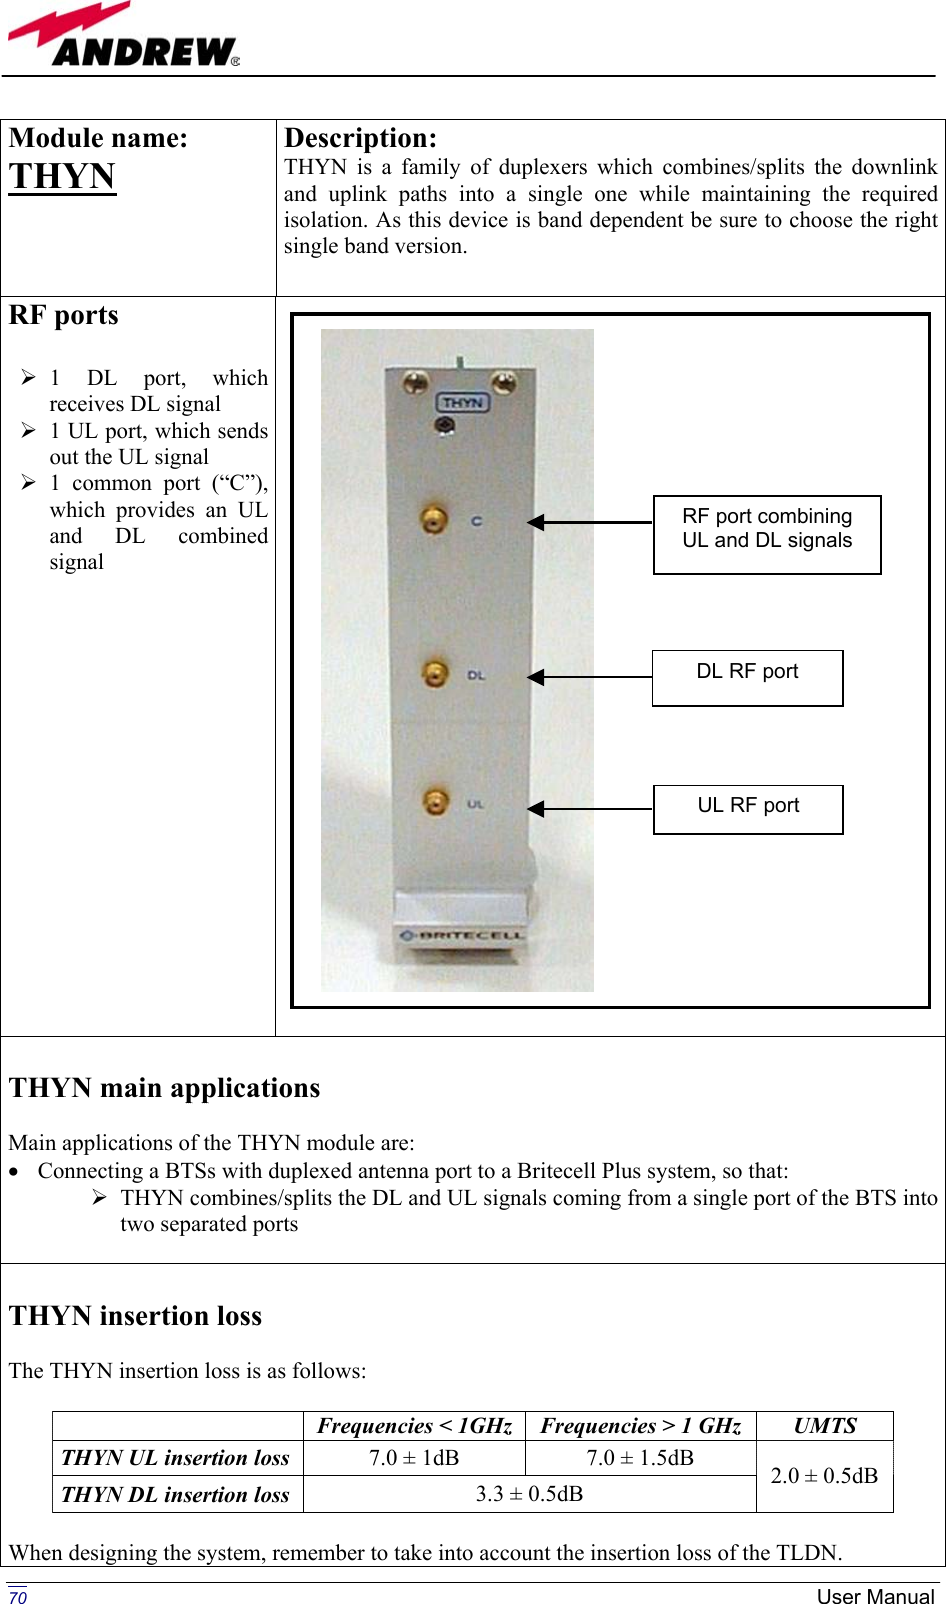  Module name:  THYN  Description: THYN is a family of duplexers which combines/splits the downlink and uplink paths into a single one while maintaining the required isolation. As this device is band dependent be sure to choose the right single band version.   RF ports   1 DL port, which receives DL signal  1 UL port, which sends out the UL signal  1 common port (“C”), which provides an UL and DL combined signal      THYN main applications  Main applications of the THYN module are: •  Connecting a BTSs with duplexed antenna port to a Britecell Plus system, so that:  THYN combines/splits the DL and UL signals coming from a single port of the BTS into two separated ports   THYN insertion loss   The THYN insertion loss is as follows:   Frequencies &lt; 1GHz  Frequencies &gt; 1 GHz  UMTS THYN UL insertion loss   7.0 ± 1dB  7.0 ± 1.5dB THYN DL insertion loss   3.3 ± 0.5dB  2.0 ± 0.5dB  When designing the system, remember to take into account the insertion loss of the TLDN. RF port combining UL and DL signals UL RF port DL RF port  70 User Manual